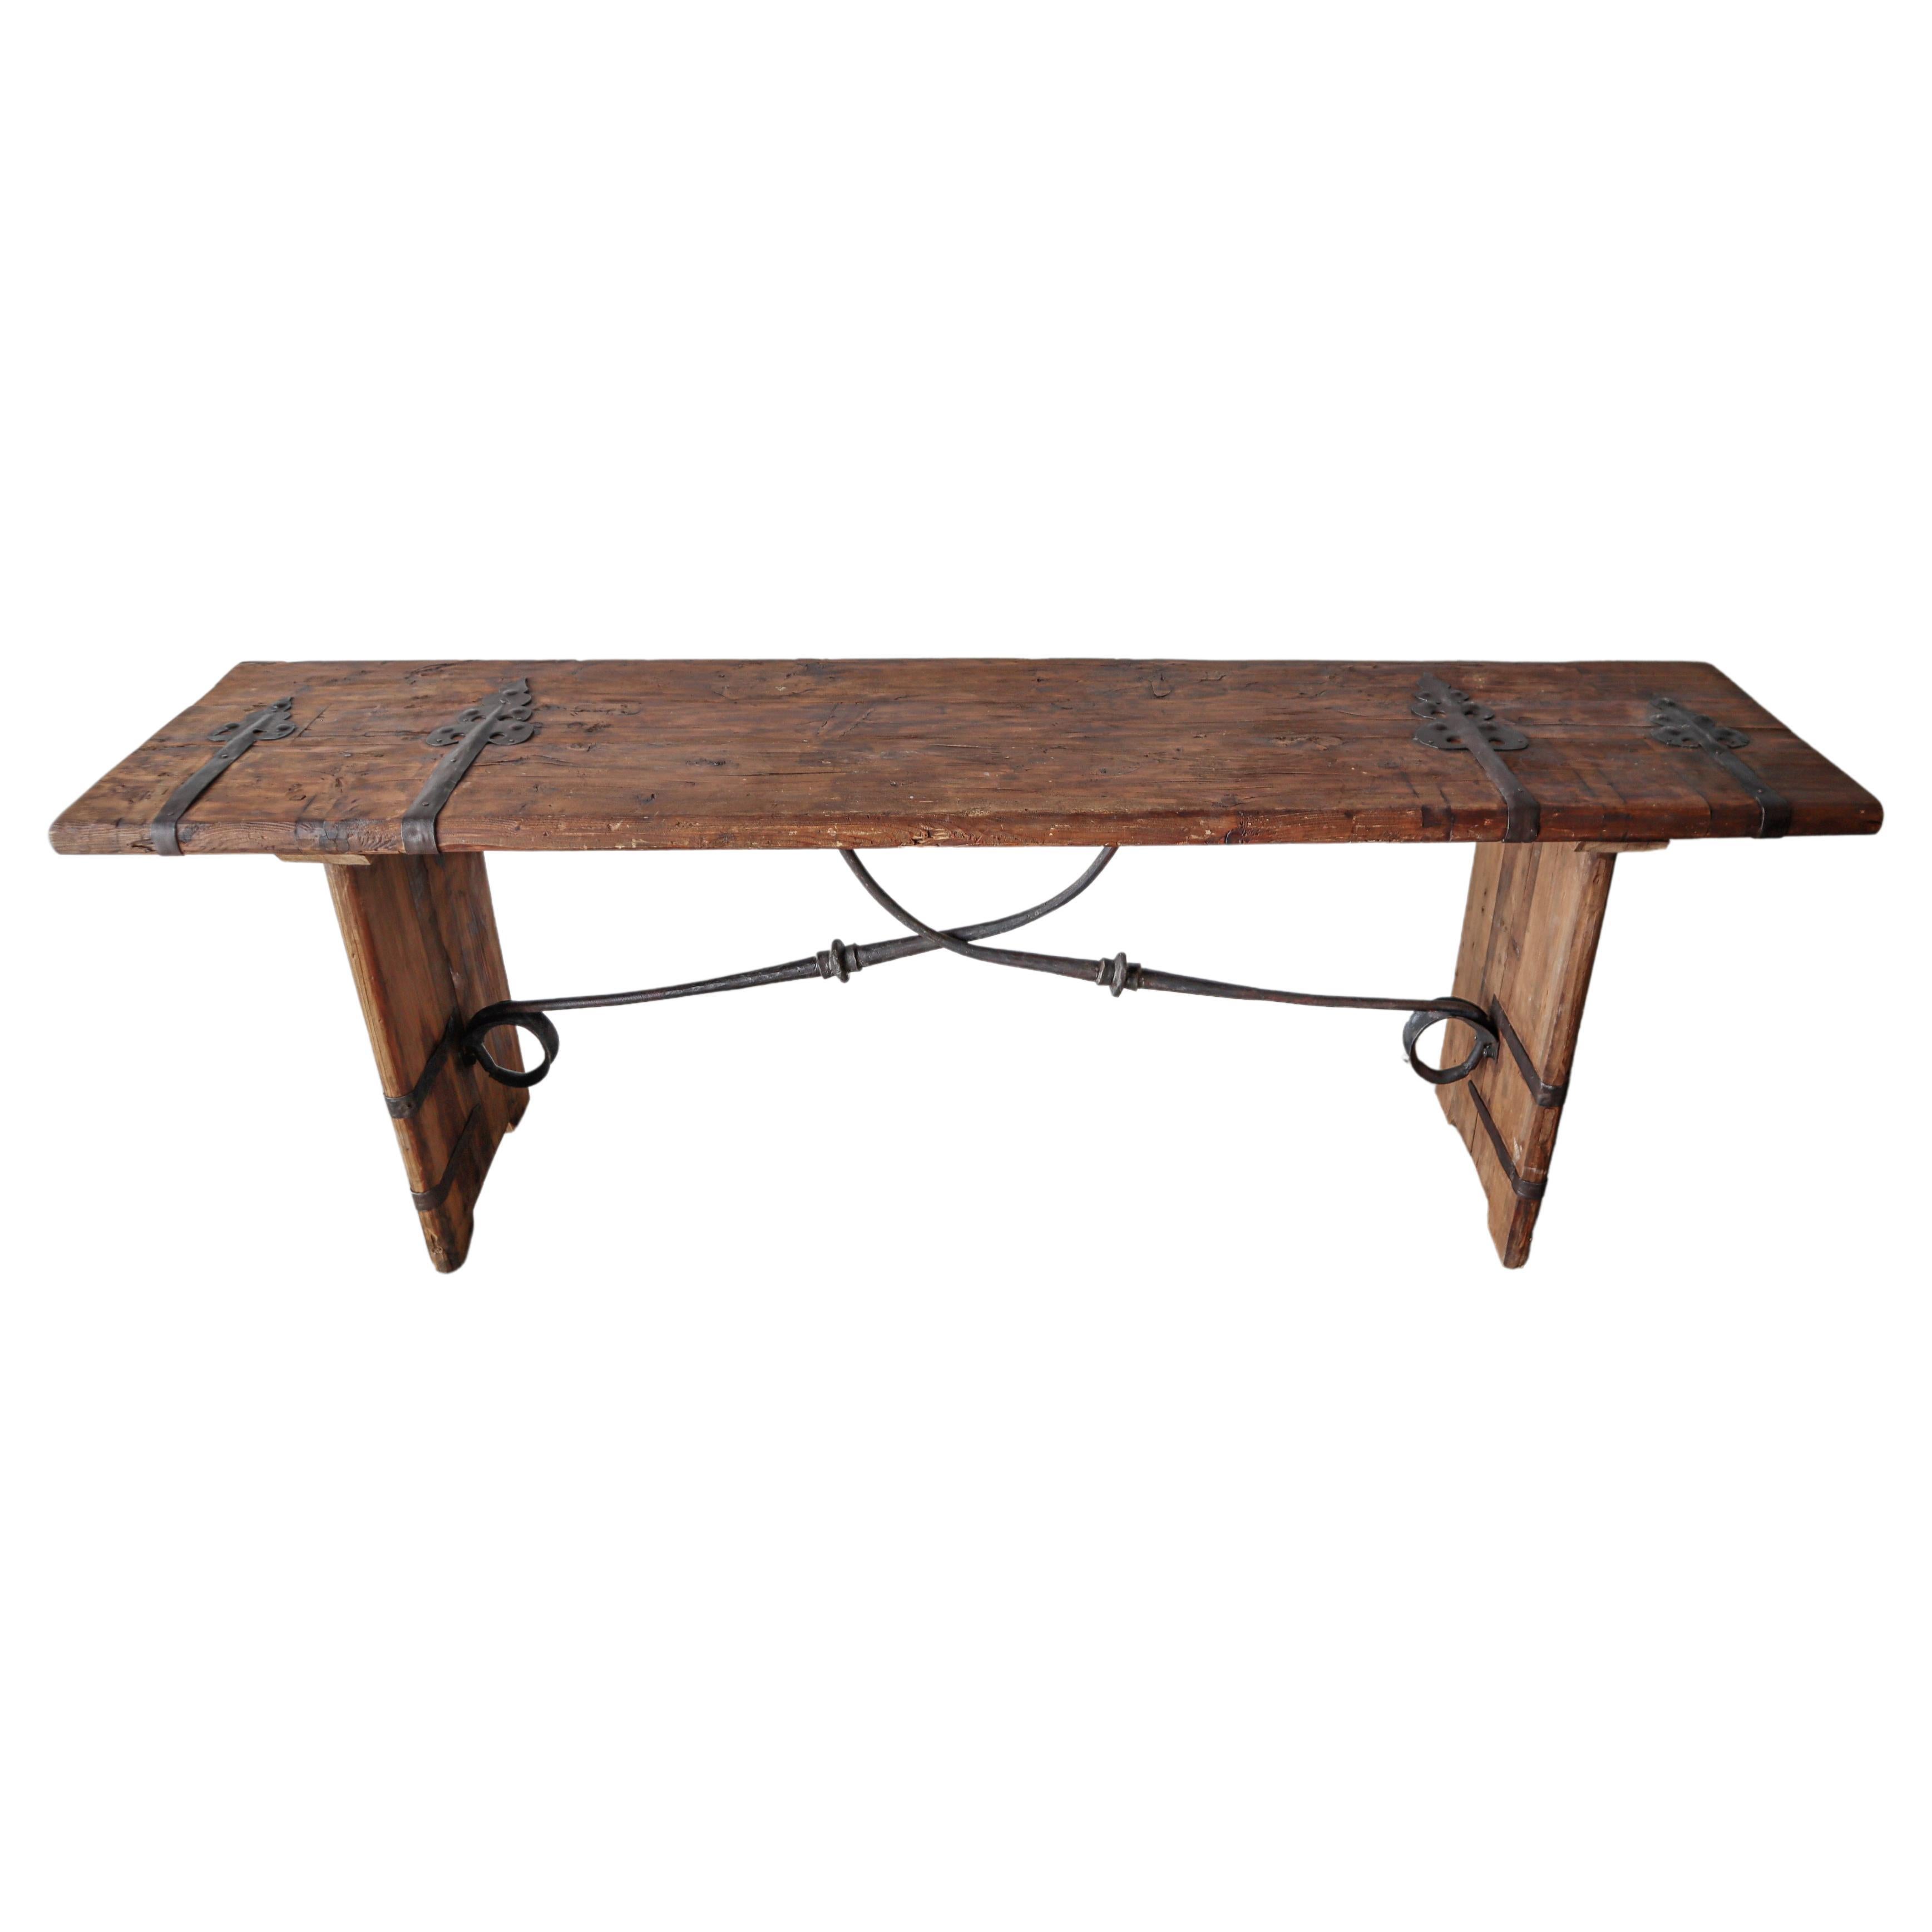 8ft Rustic Reclaimed Wood and Iron Console Table For Sale